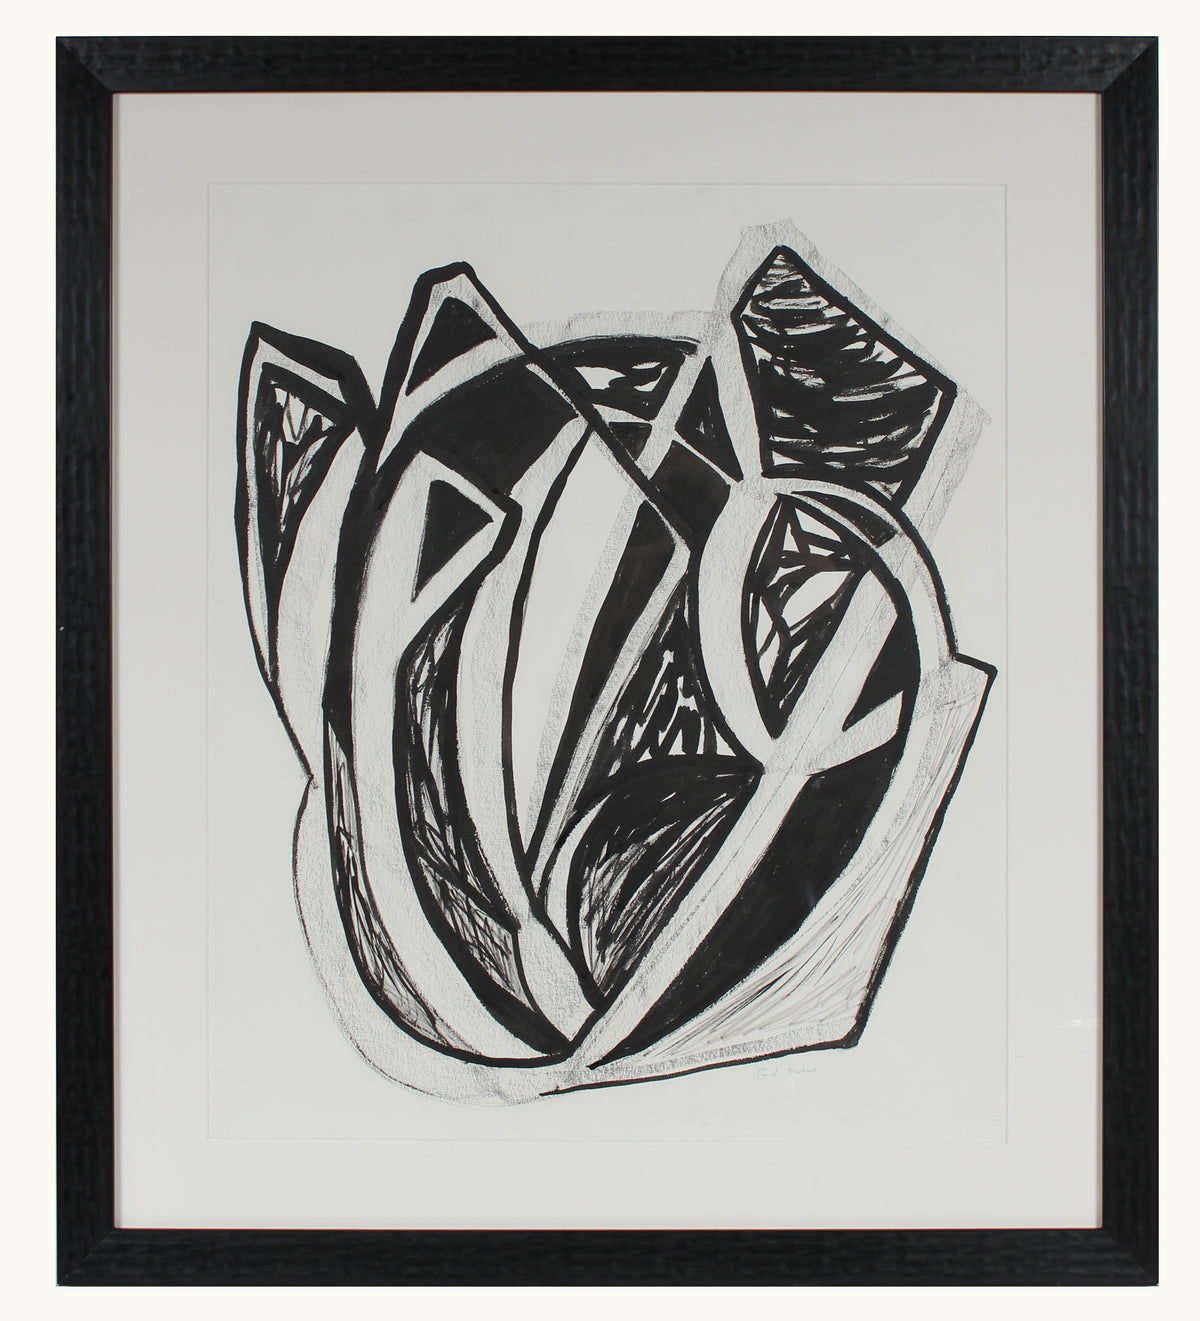 Heart-Shaped Cubist Abstract &lt;br&gt;20th Century Ink &amp; Charcoal &lt;br&gt;&lt;br&gt;#93417